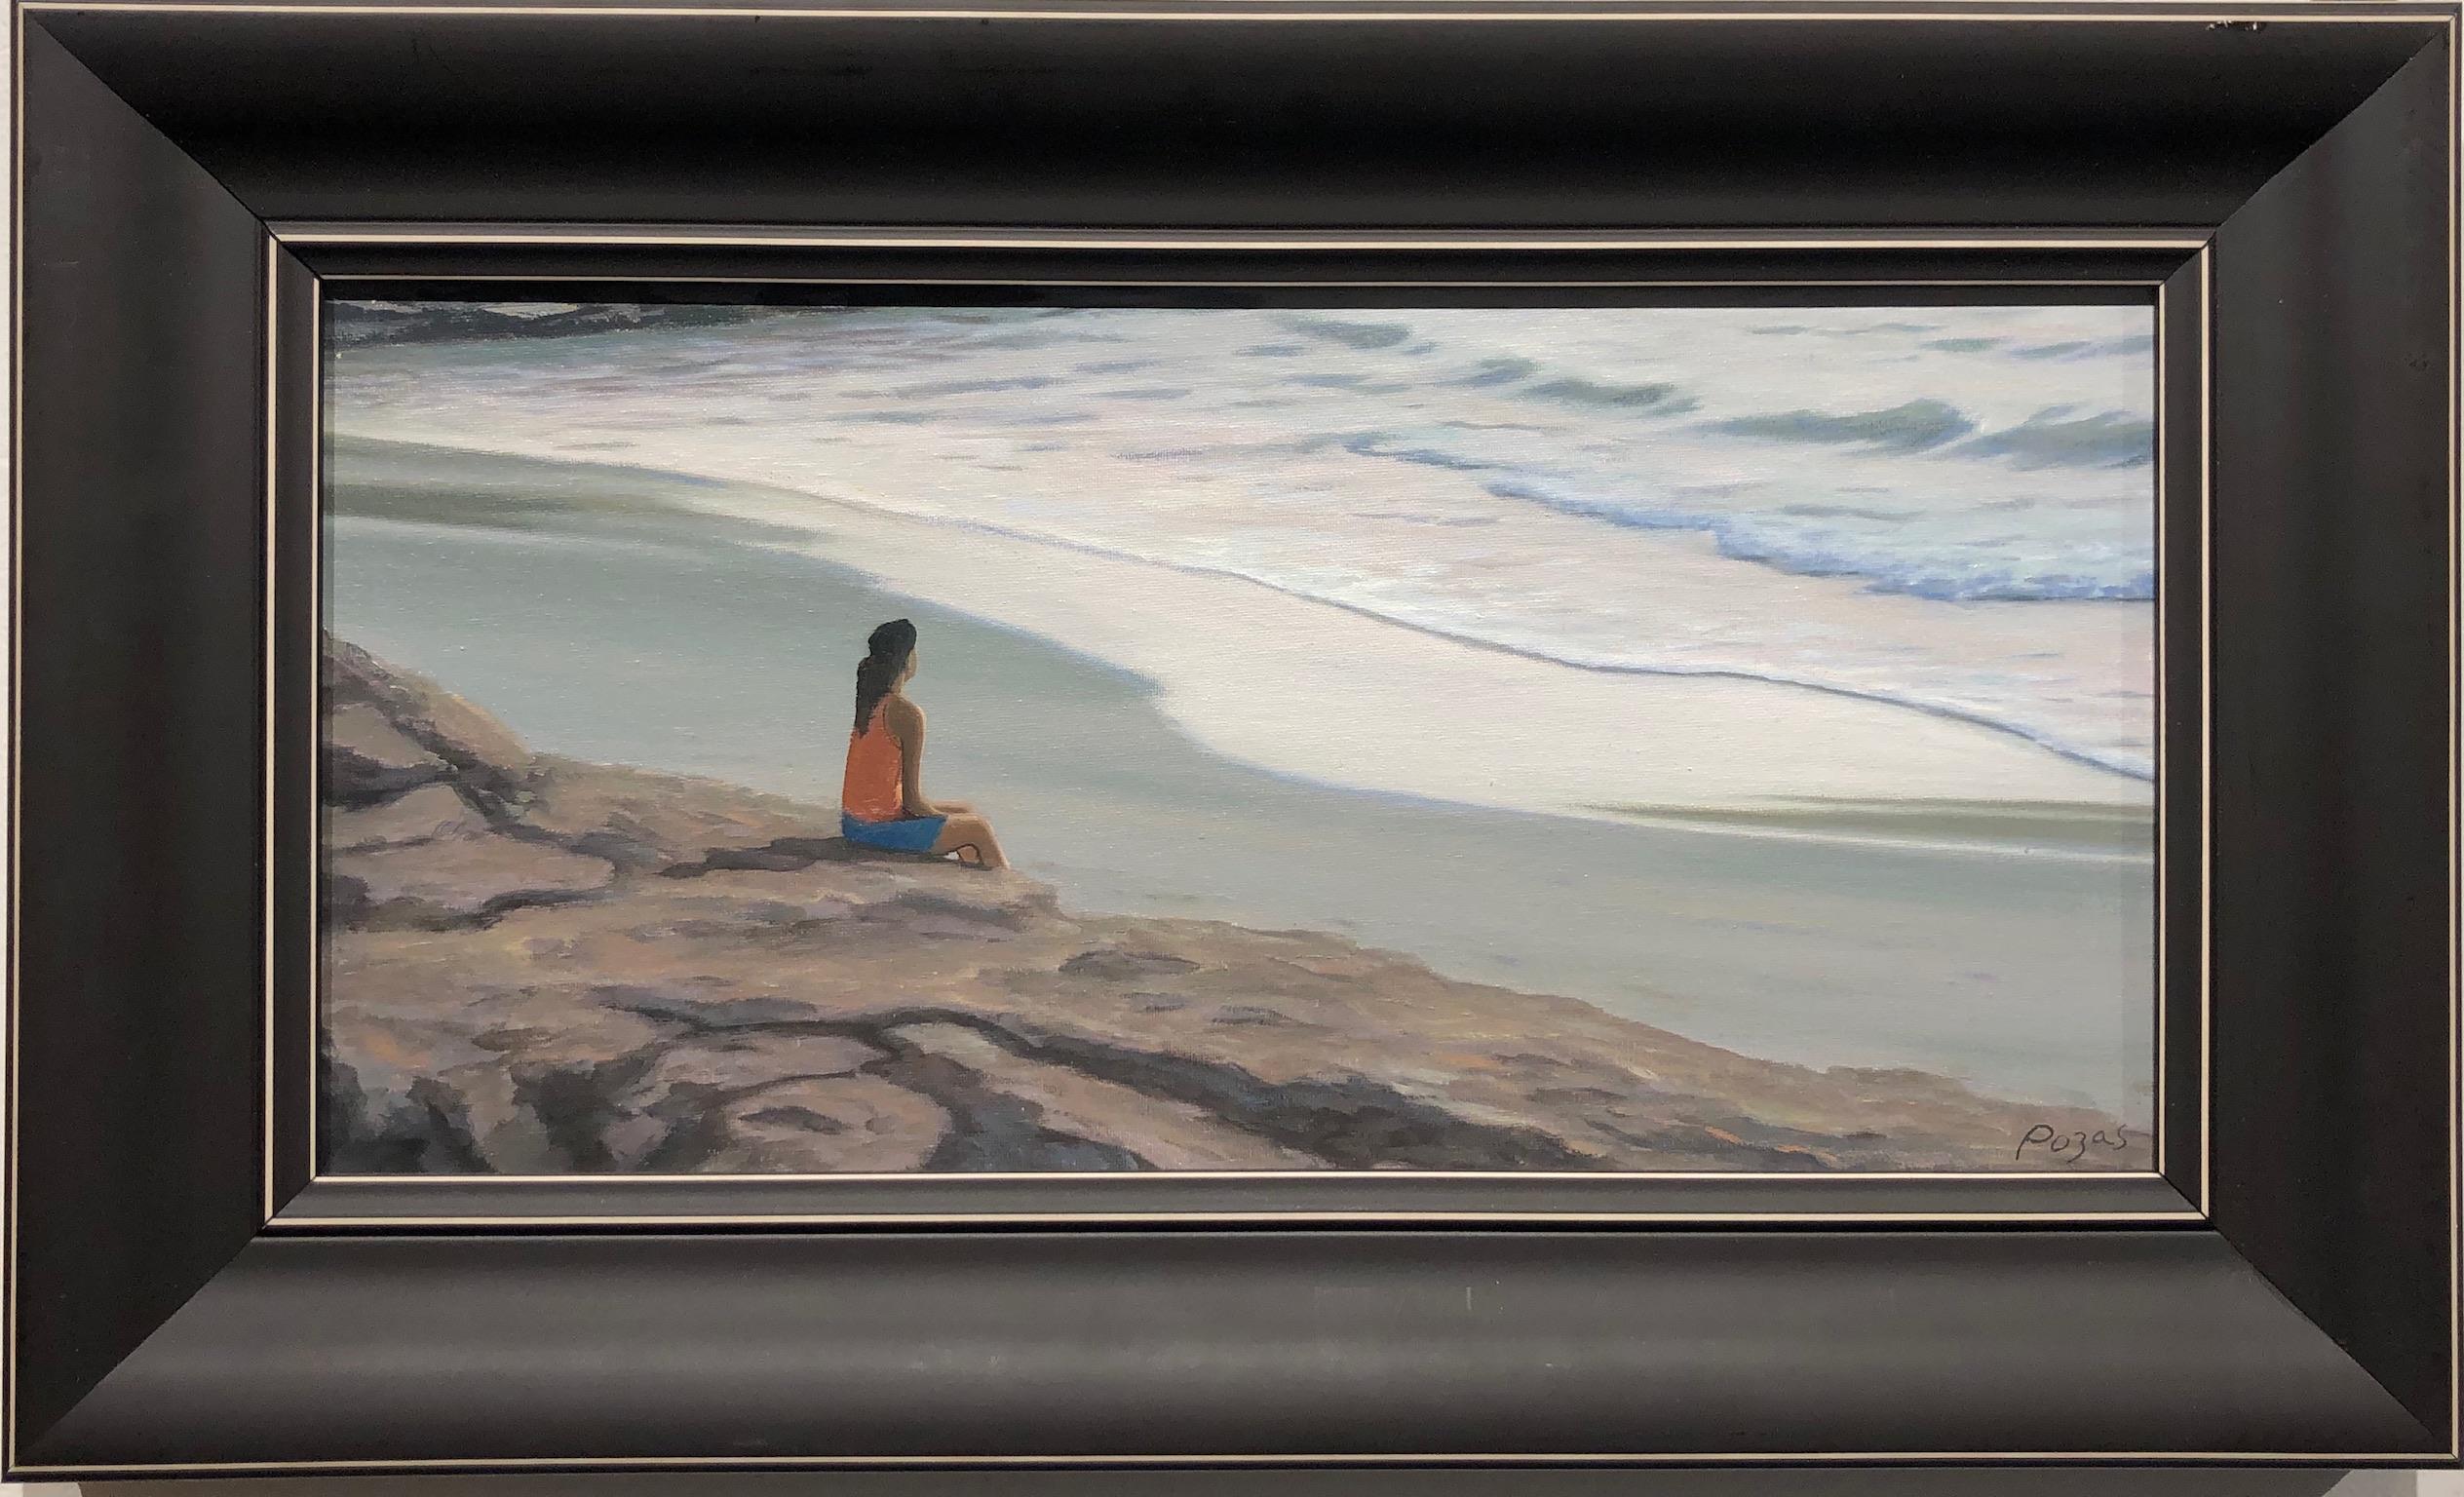 The Desired Moment. Surreal Ocean Landscape with Lone Female Figure, Framed - Painting by René Monzón Relova “Pozas”